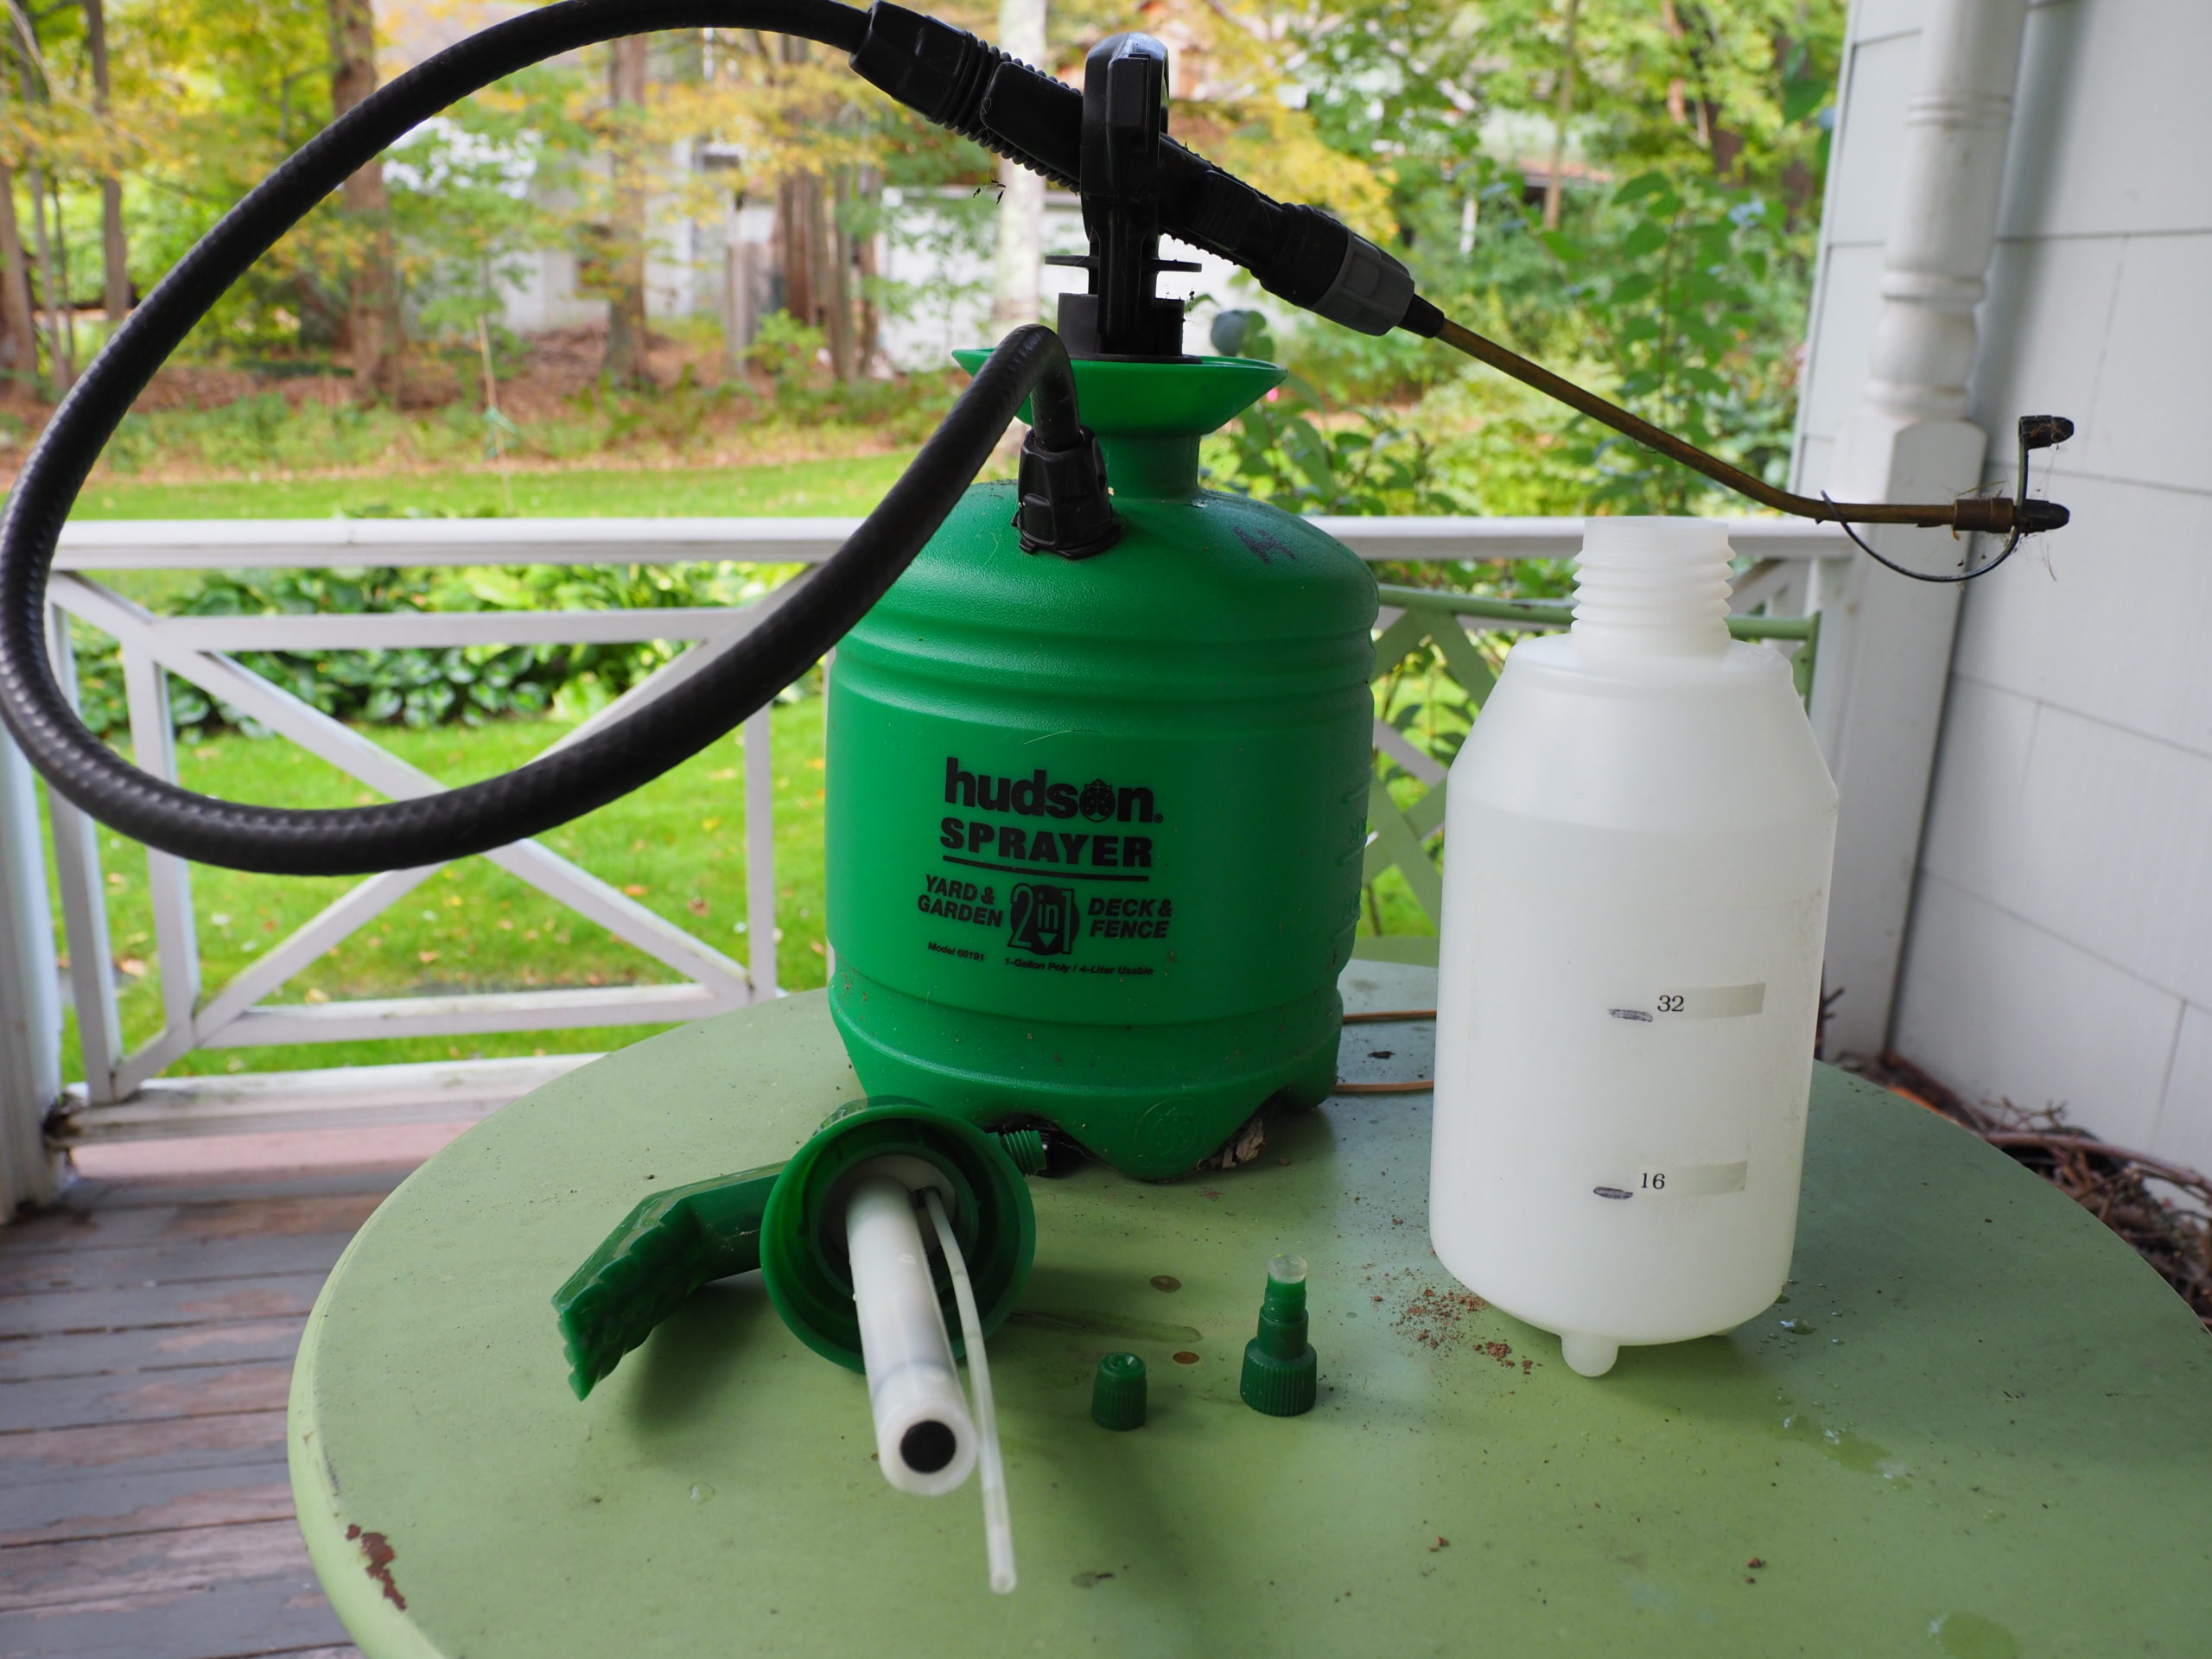 At the end of the gardening season it’s critical to clean and inspect any garden sprayers you have. Flush the tank, clean and clear the nozzle, then put water in the tank and pressurize to listen and watch for leaks.  The smaller sprayer on the right has nearly invisible marks for liquid level guides.  Make your own with a permanent marker or label maker.